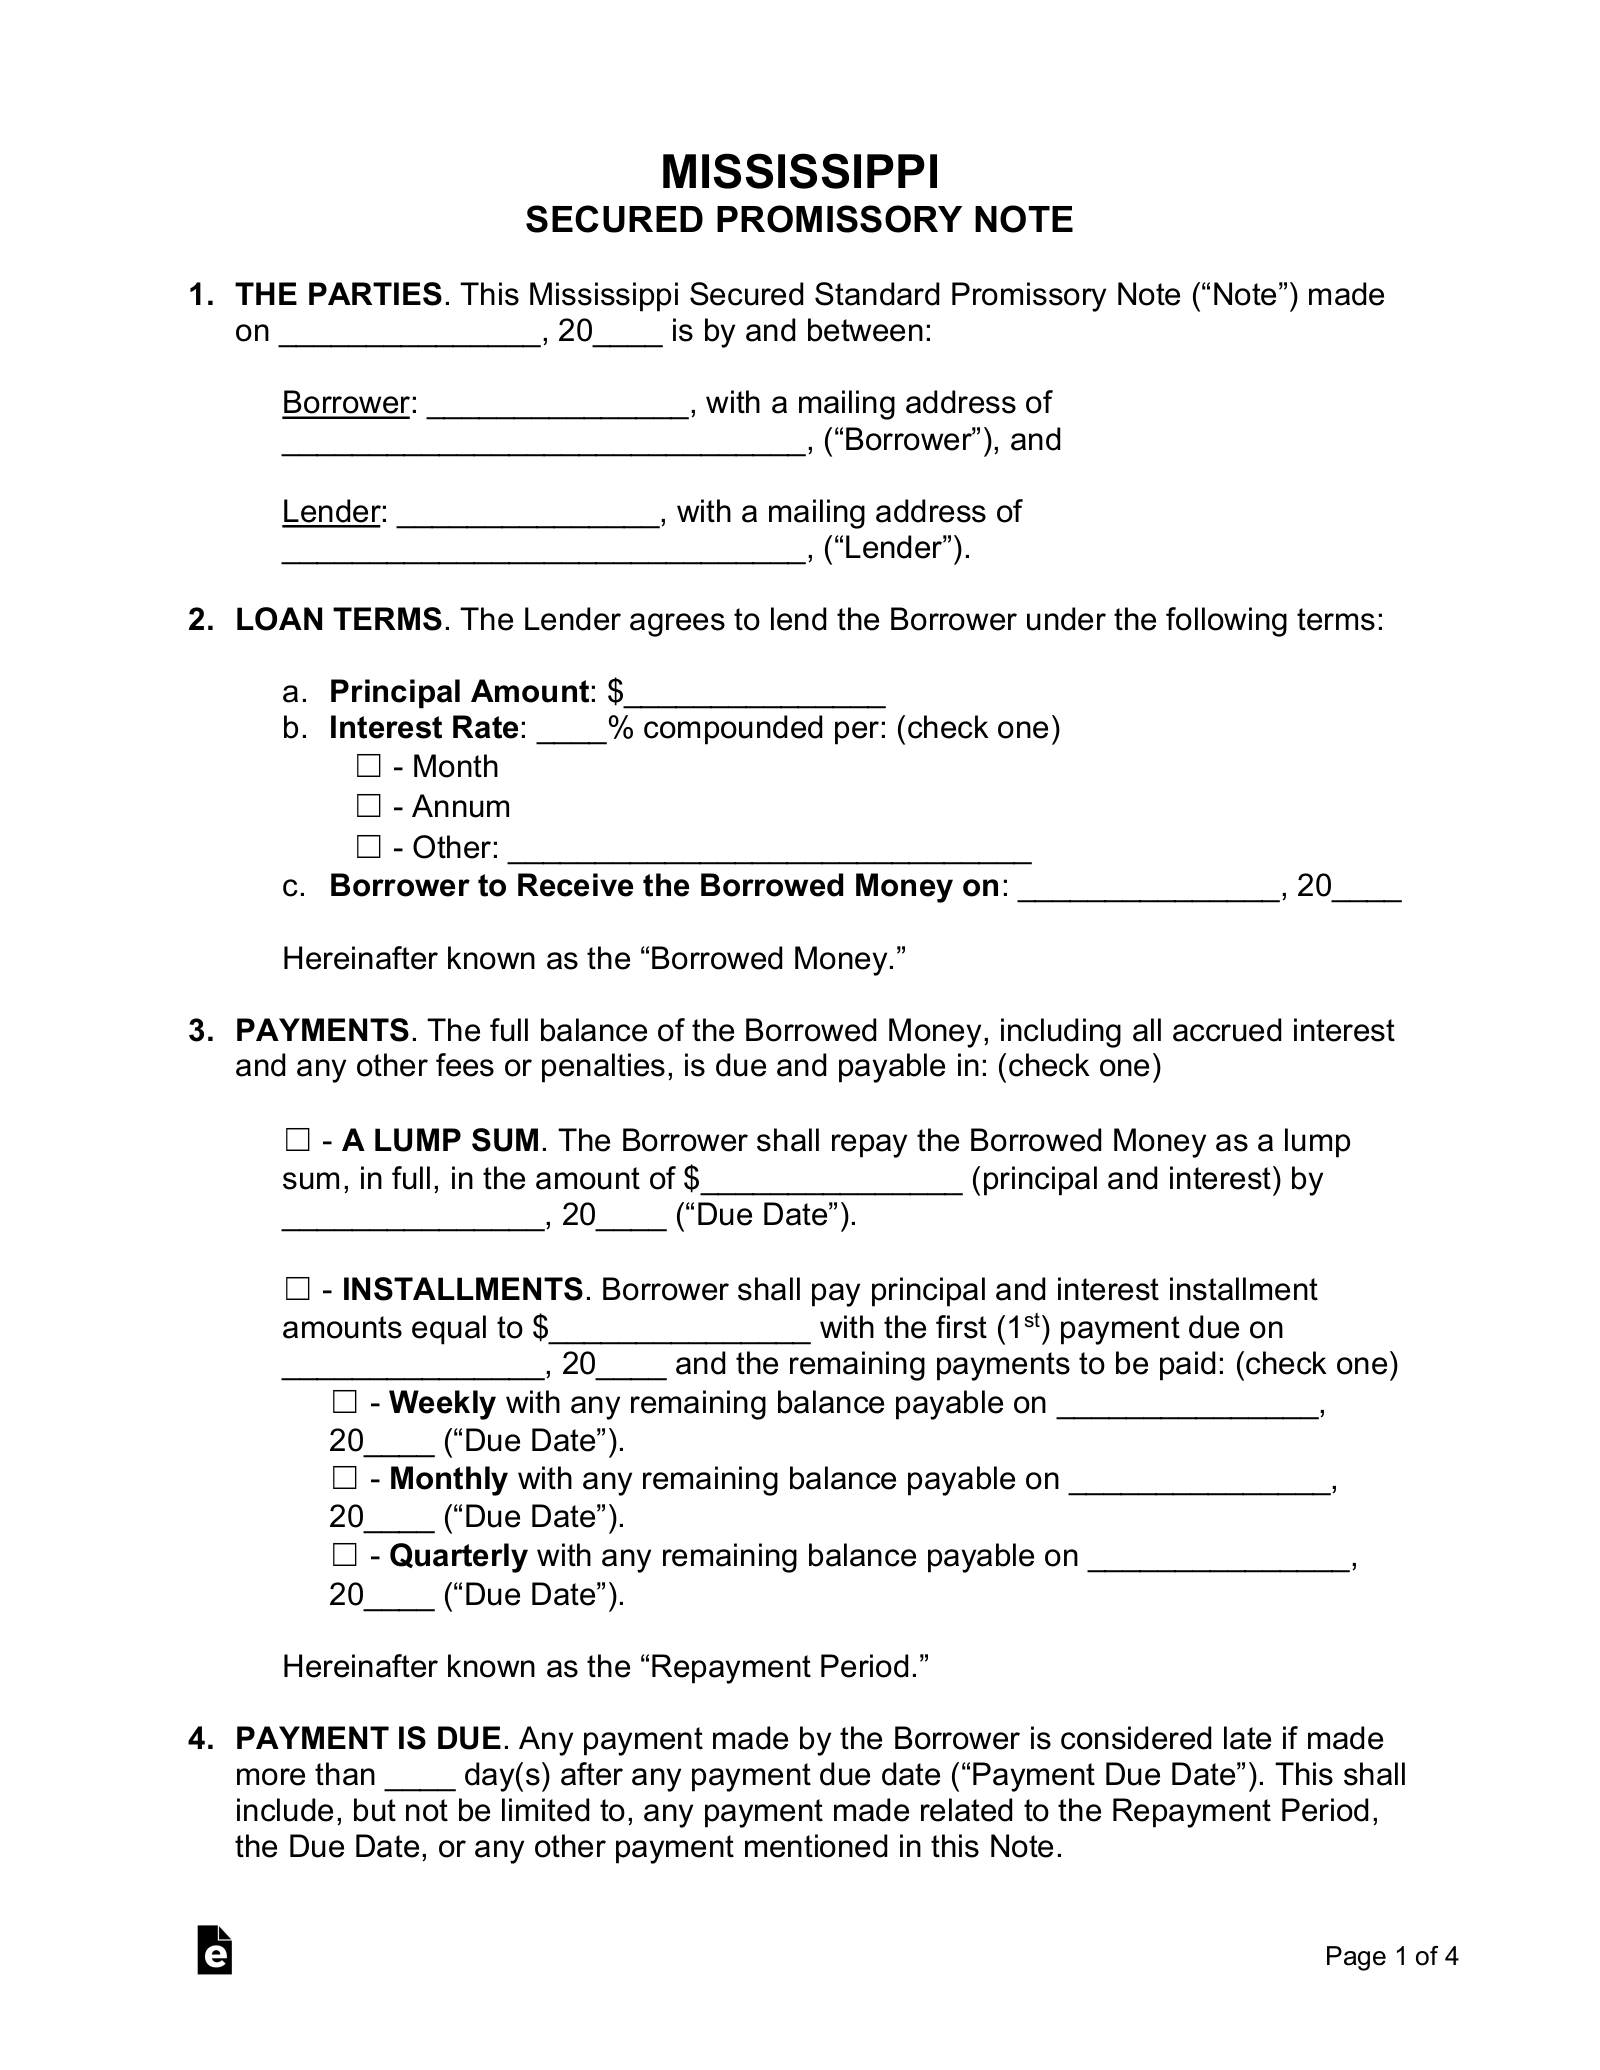 Mississippi Secured Promissory Note Template